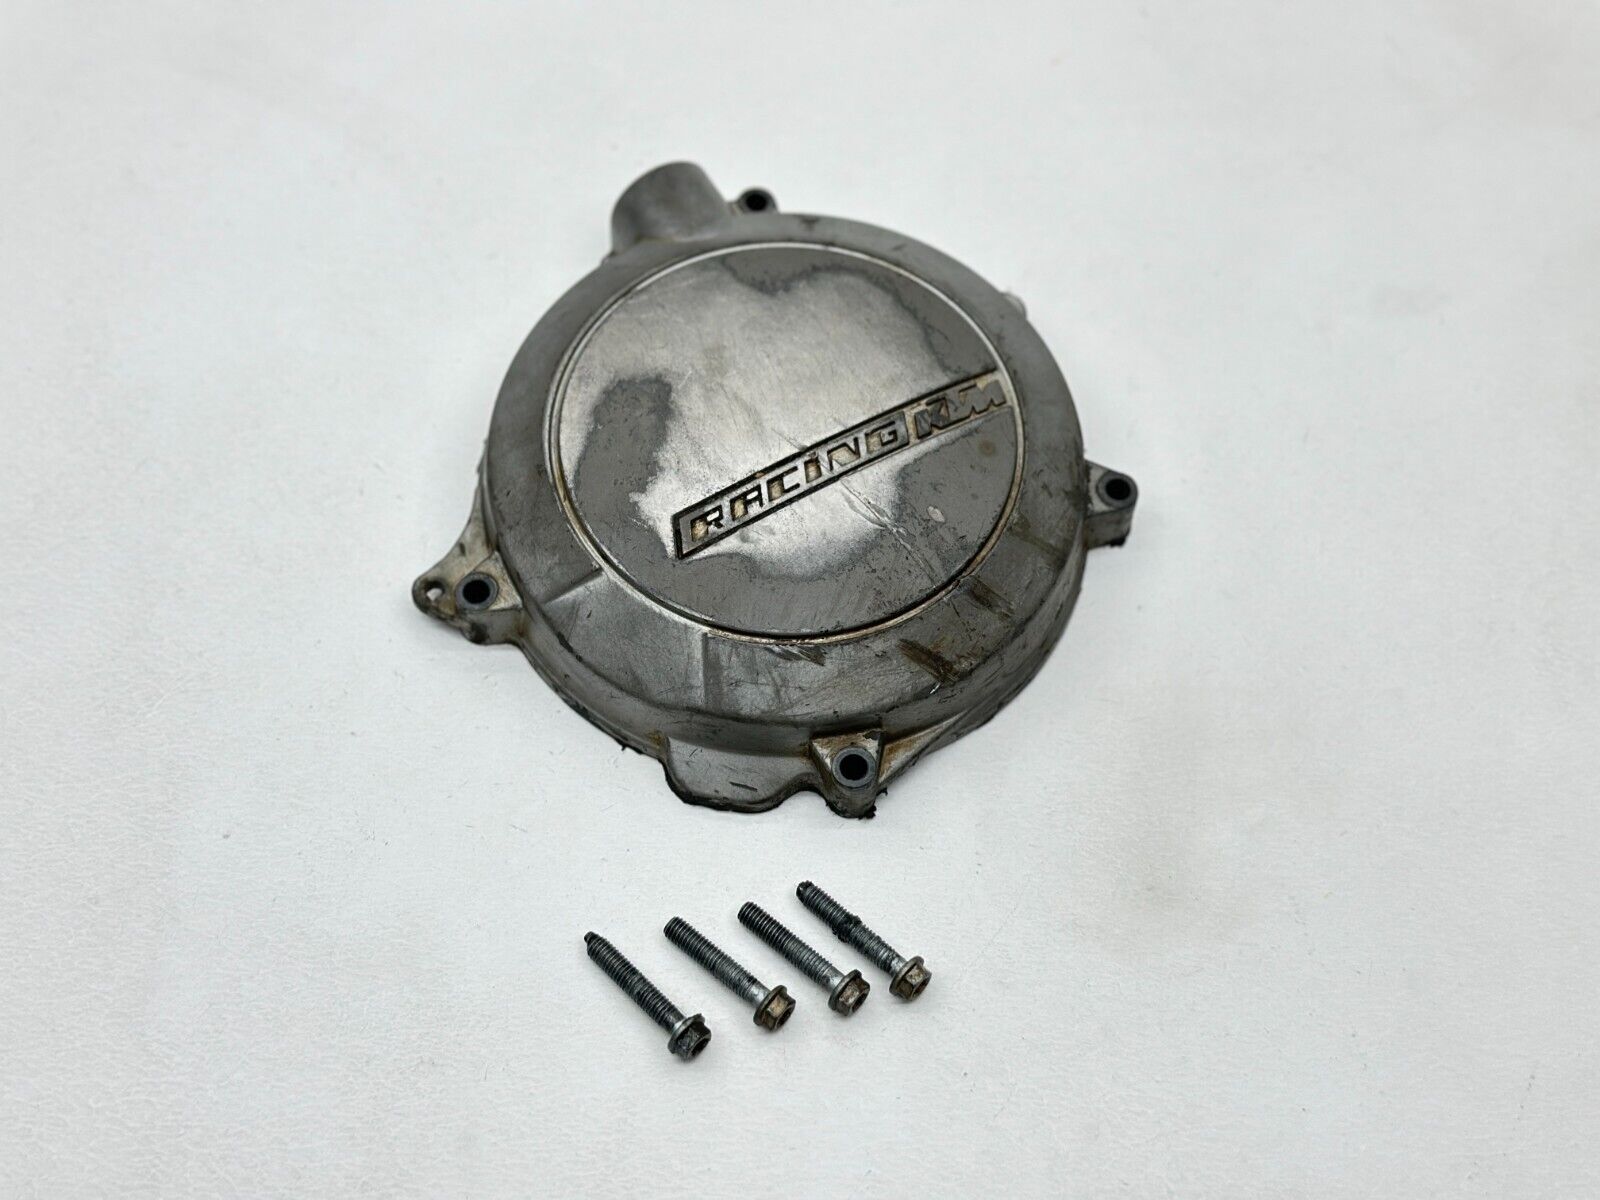 2011 KTM 150SX Clutch Cover Engine Motor Outer Case Assembly OEM 50330002400